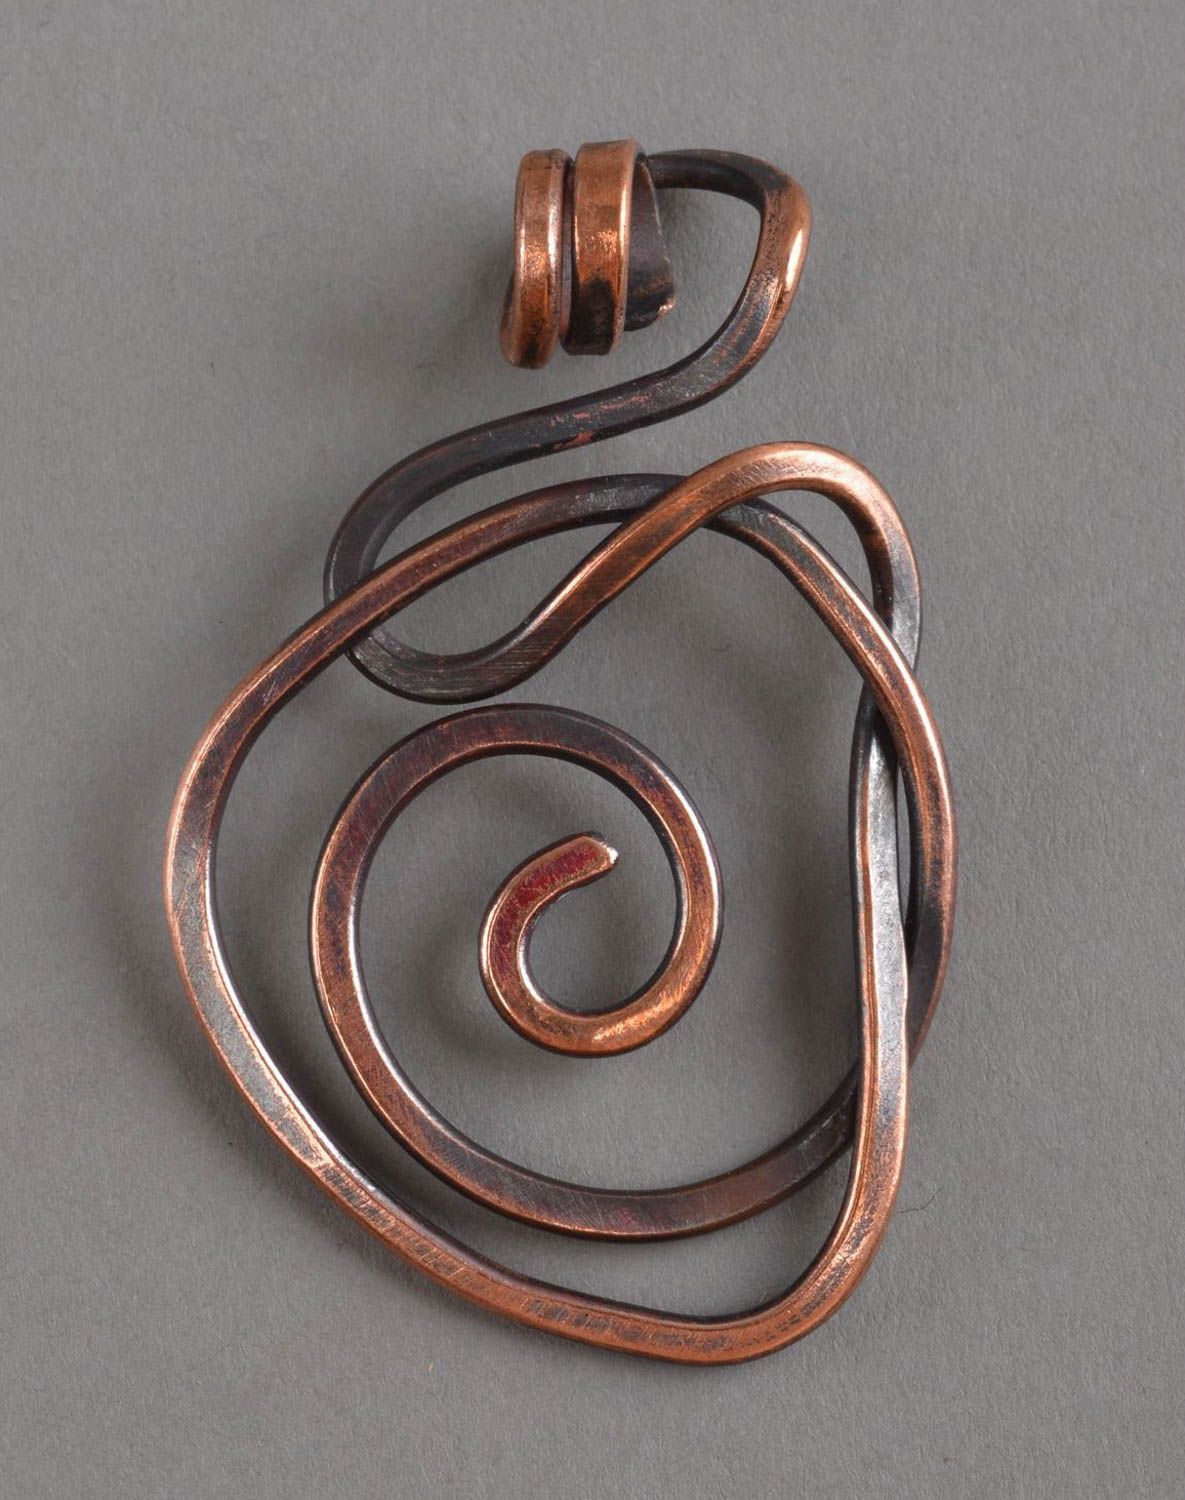 Copper pendant handmade jewelry necklace womens accessories gift ideas for women photo 2